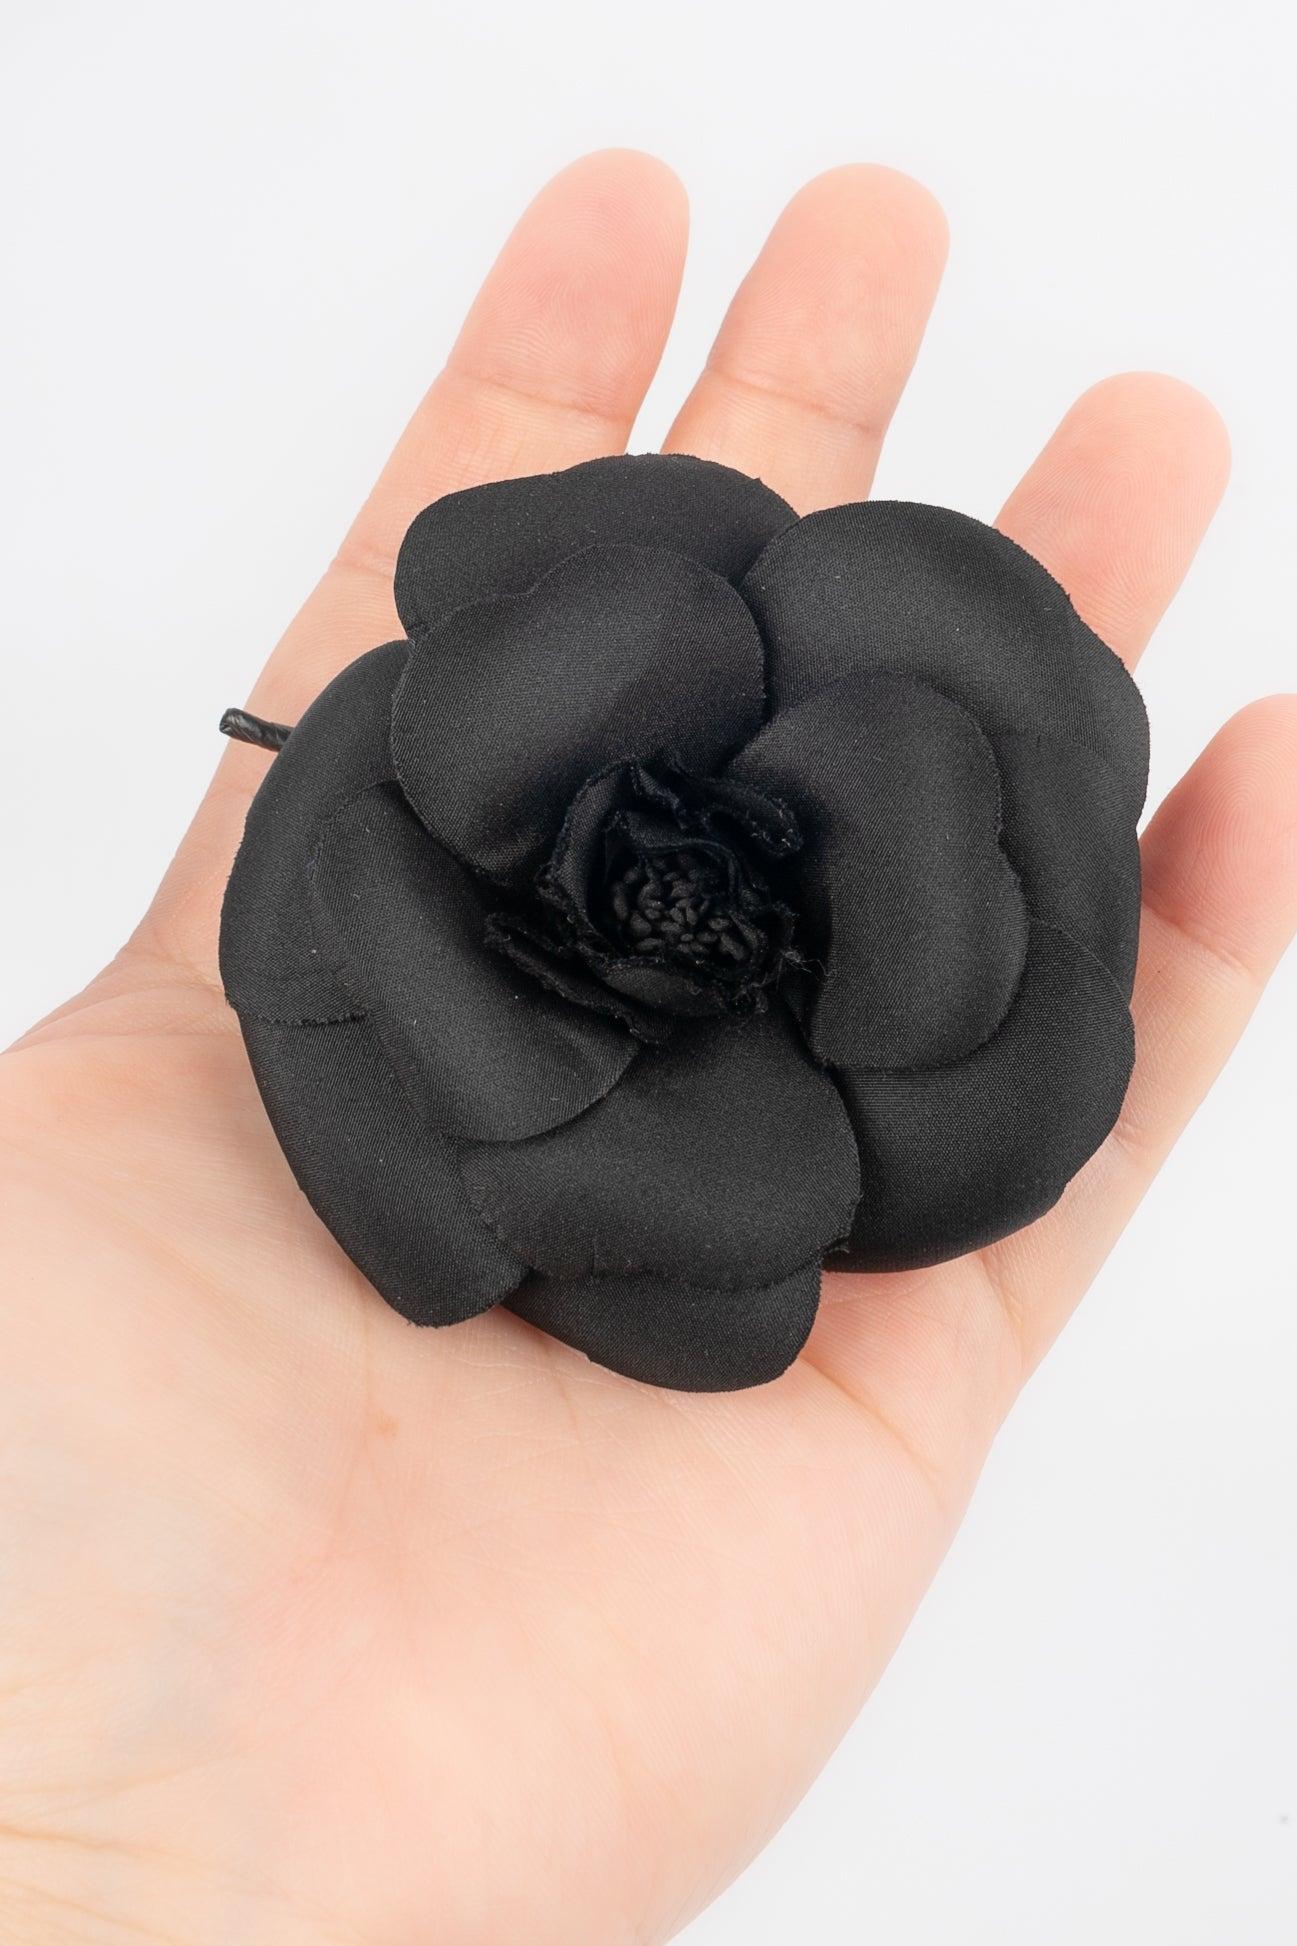 Chanel - (Made in France) Black camellia brooch.
 
 Additional information: 
 Condition: Good condition
 Dimensions: Diameter: 7 cm
 
 Seller Reference: BRB140